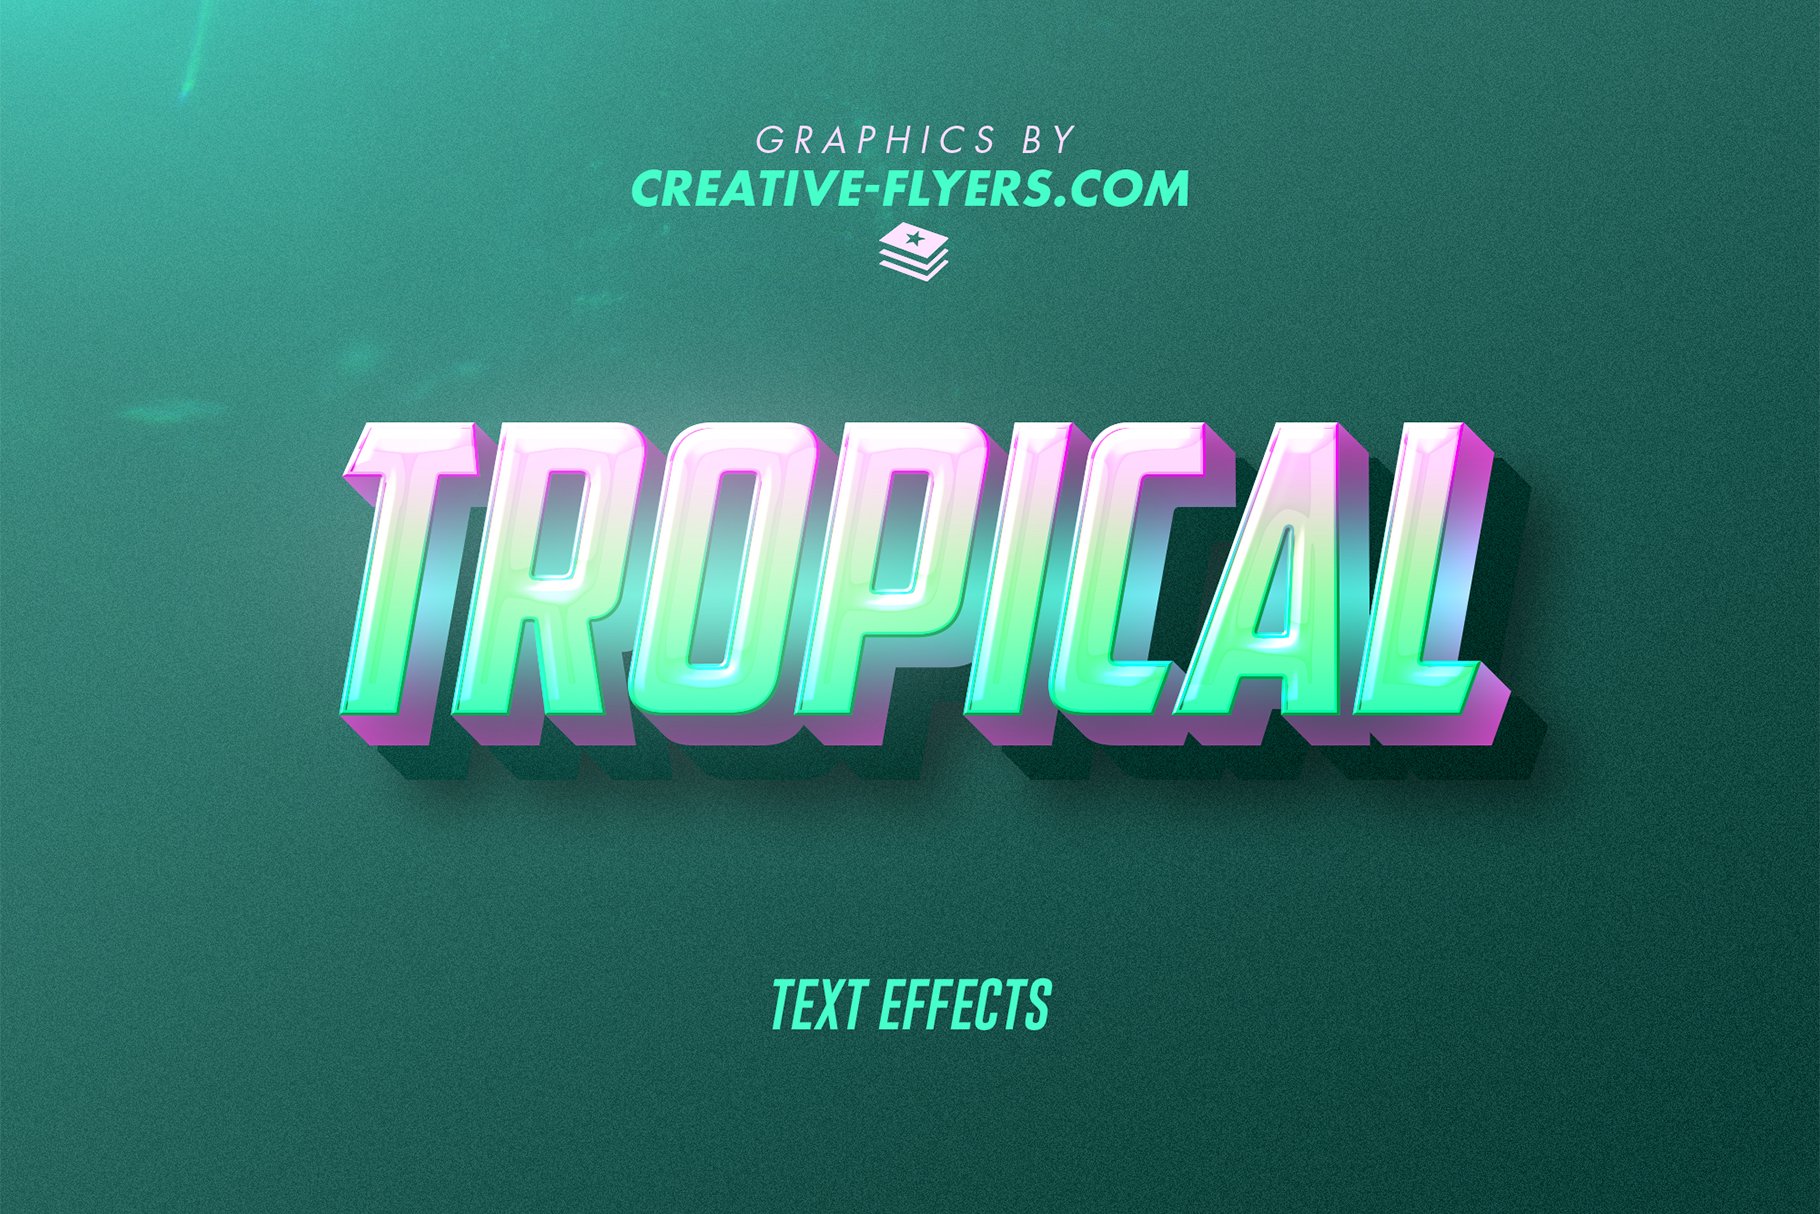 Photoshop Text Effects (Tropical)cover image.